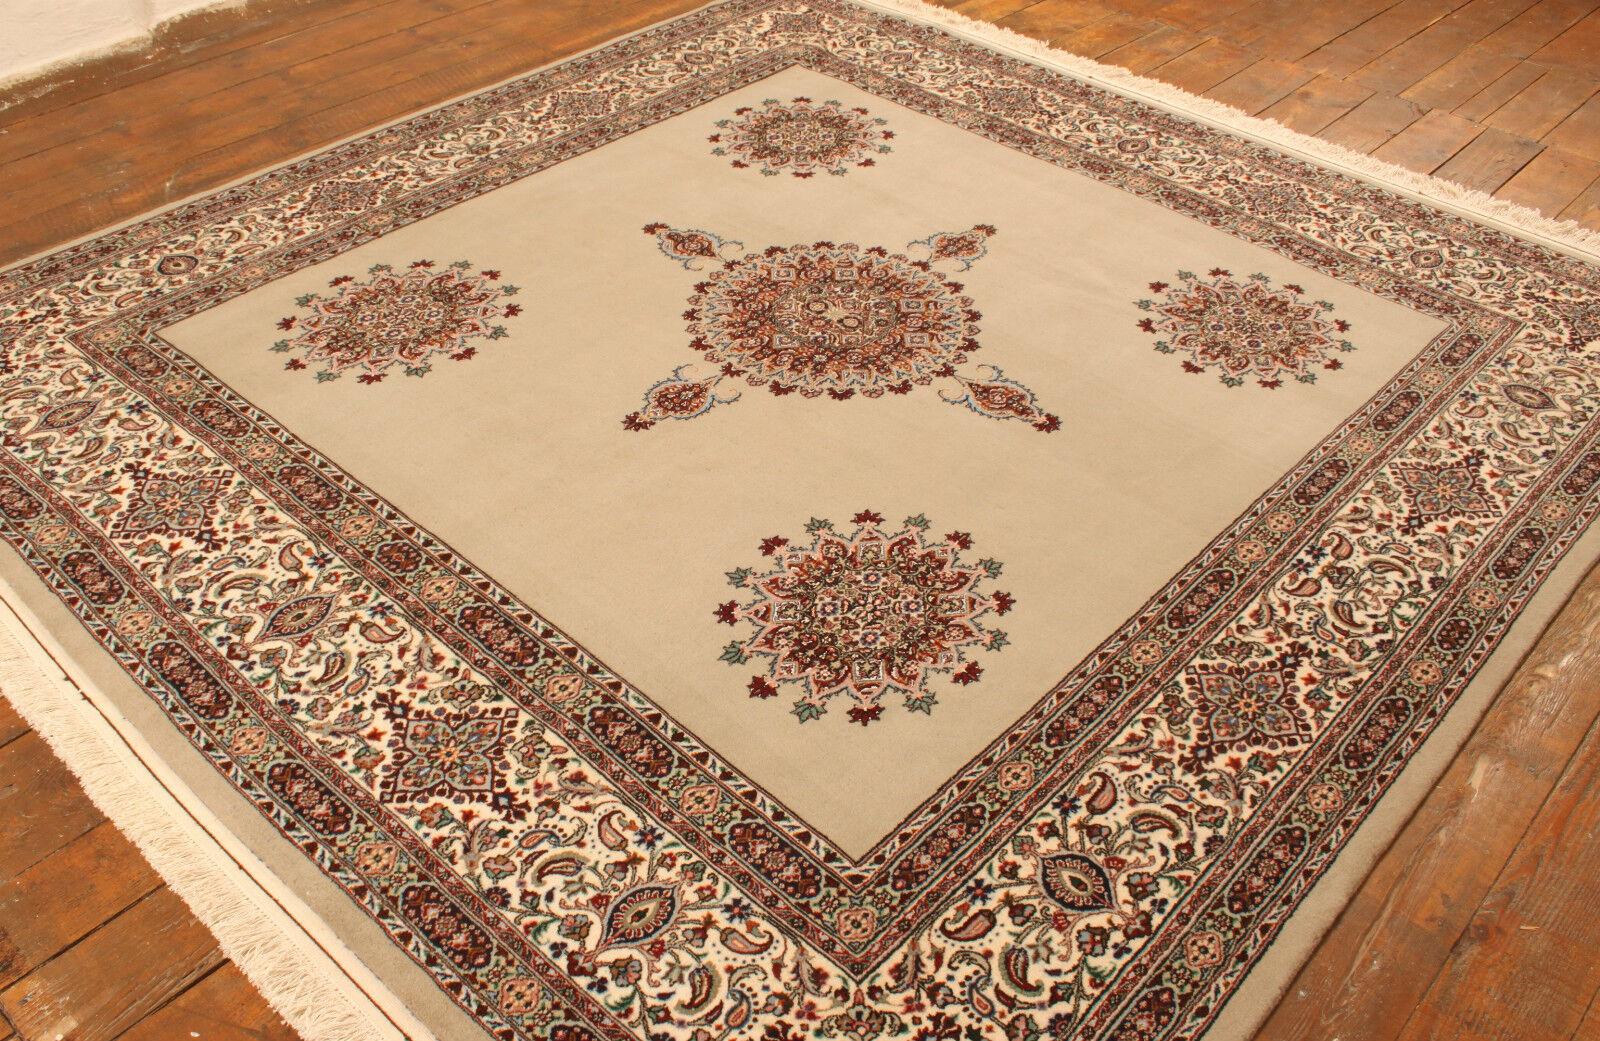 Handmade Vintage Persian Style Isfahan Rug With Silk (8.1’ x 8.7’ / 247cm x 267cm)

Indulge in the exquisite craftsmanship of our Handmade Vintage Persian Style Isfahan Rug With Silk. Crafted in the 1990s, this luxurious rug measures 8.1’ x 8.7’